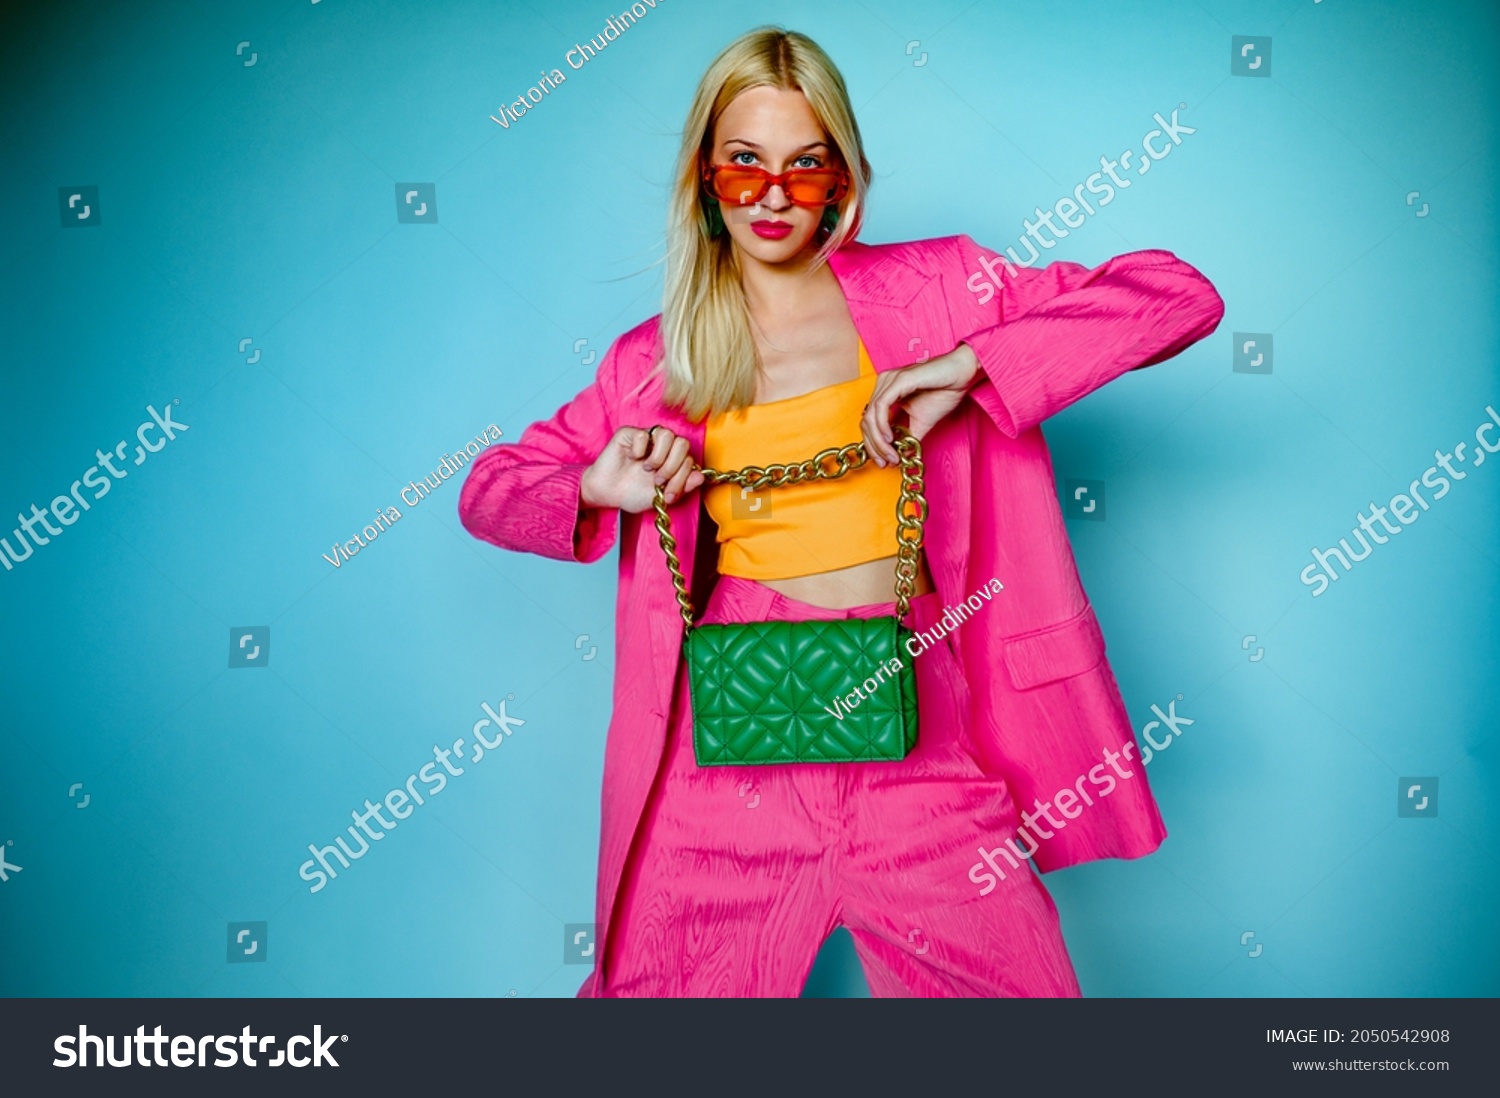 Fashion portrait of confident woman wearing trendy summer pink fuchsia color suit, orange sunglasses, holding green quilted faux leather bag, posing in studio, on blue background. Copy, empty space
 #2050542908